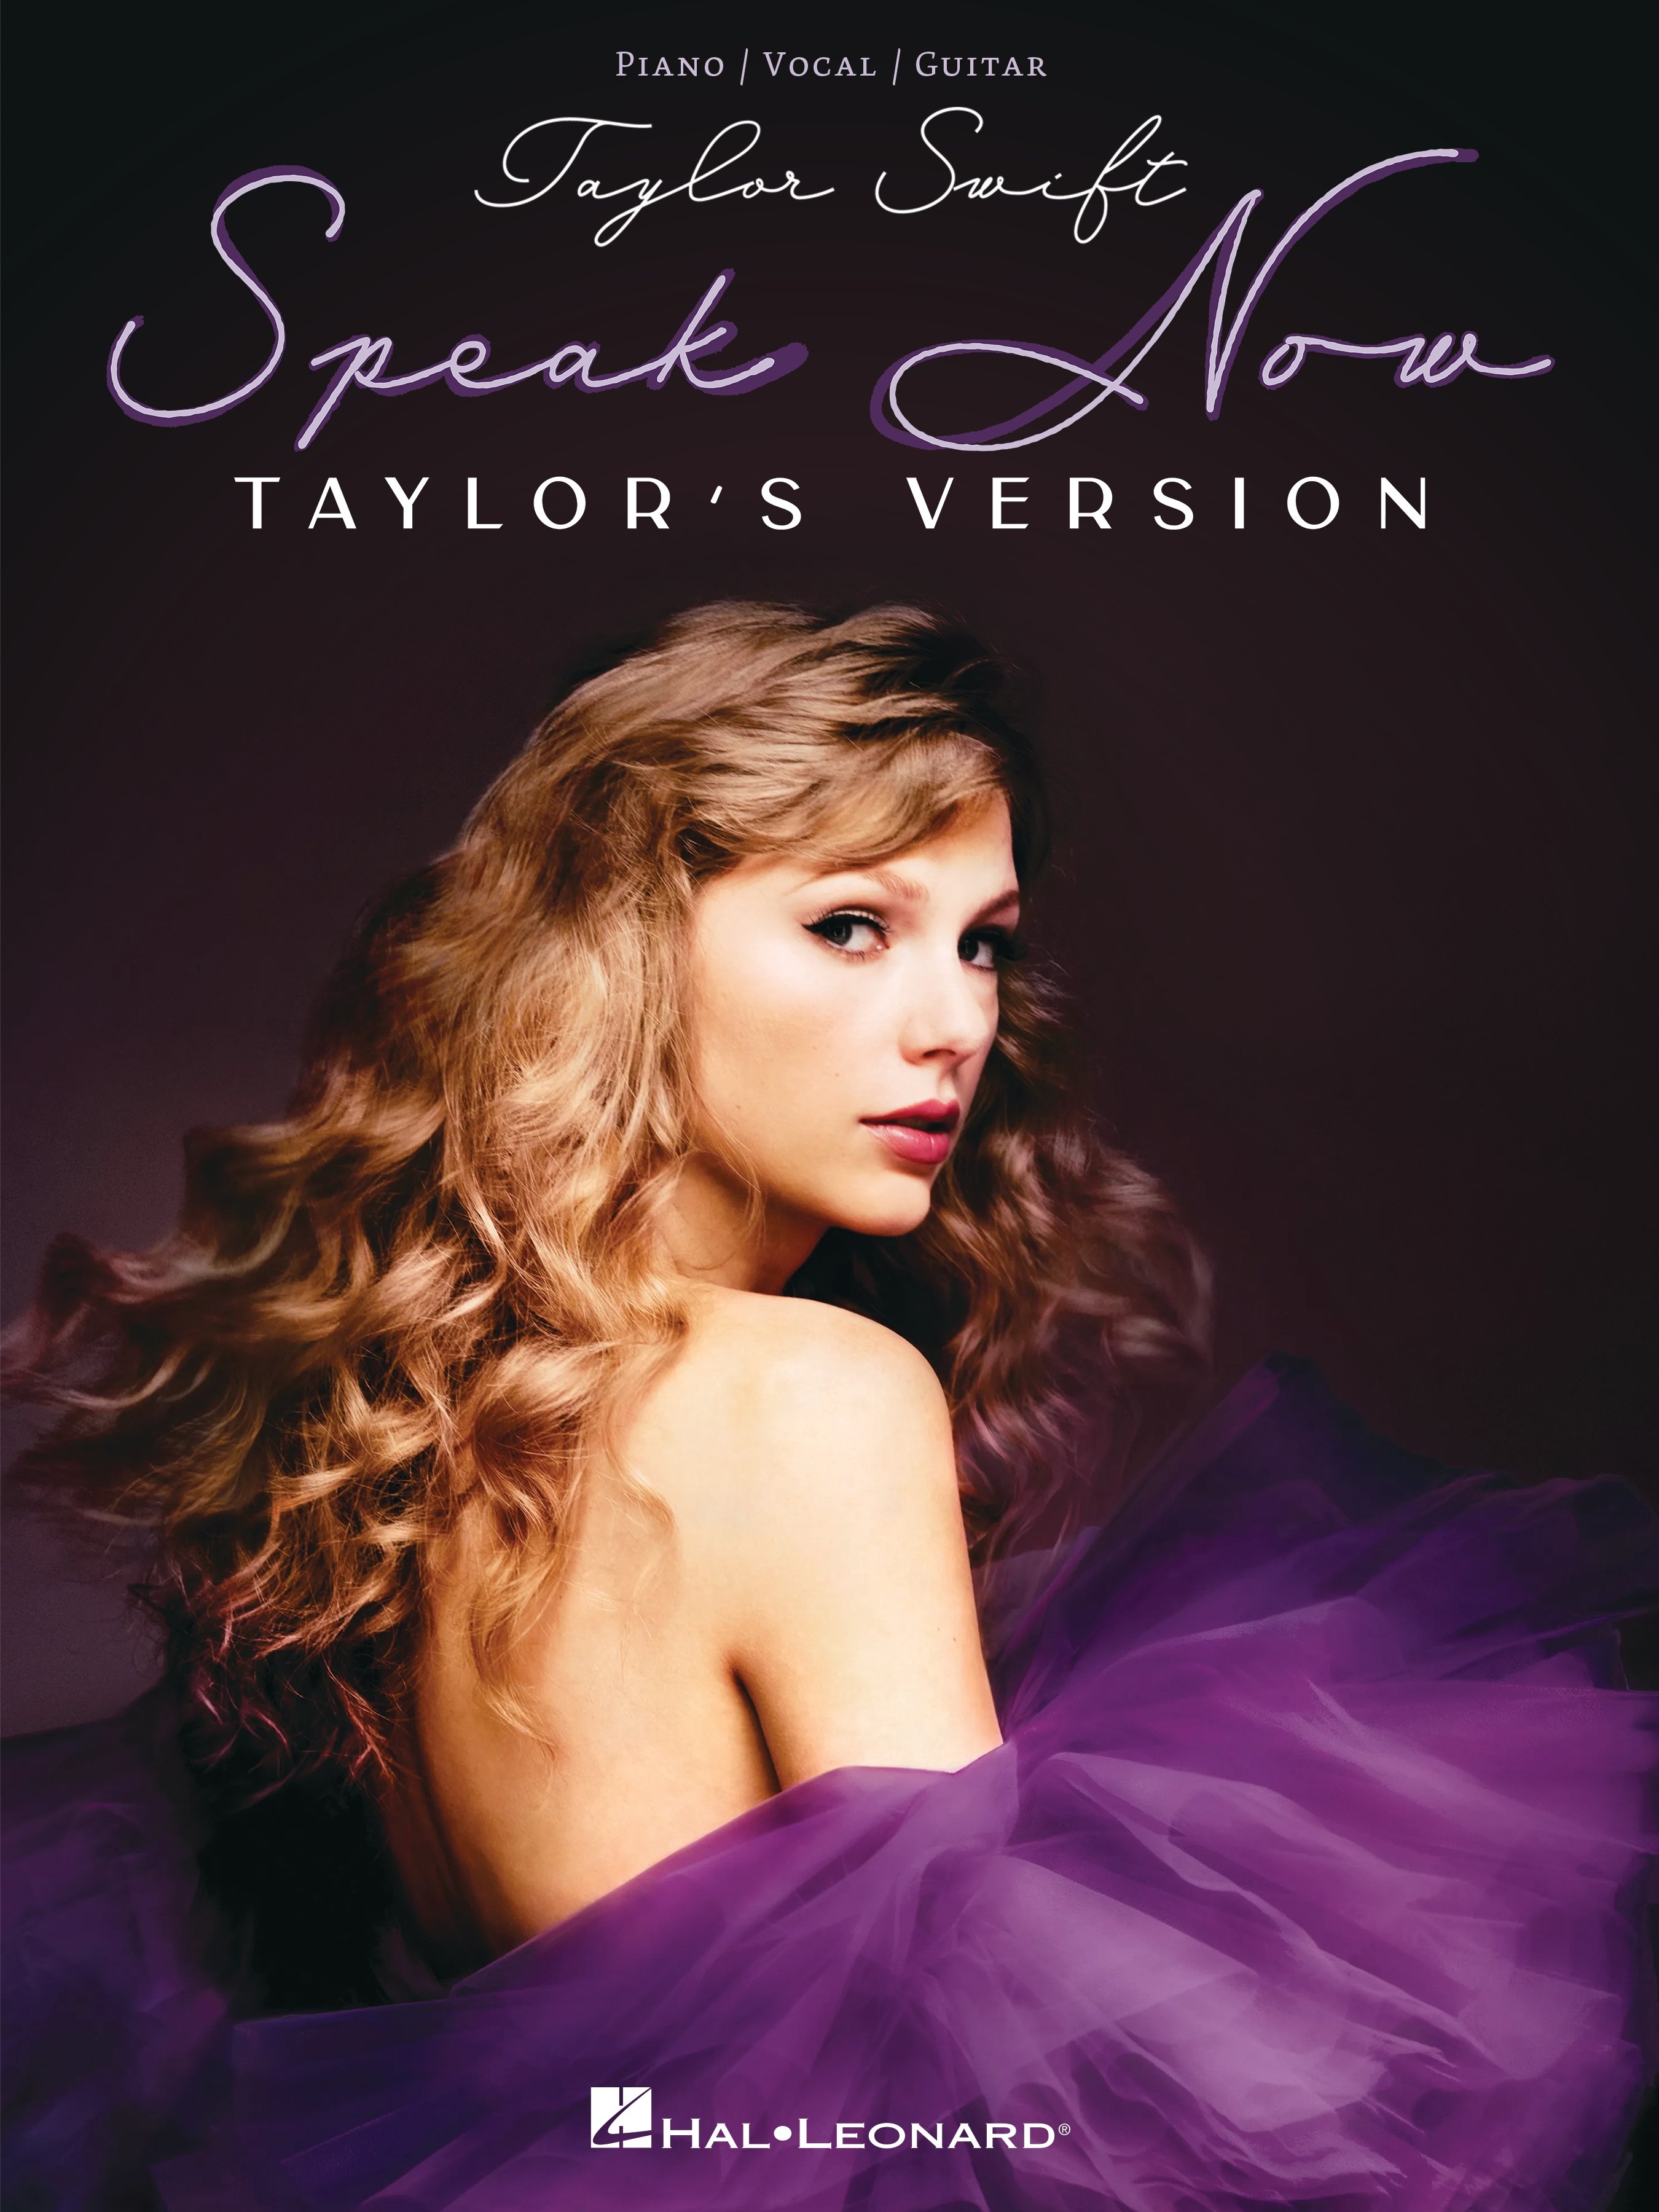 Speak Now (Taylor's Version) vocal sheet music cover